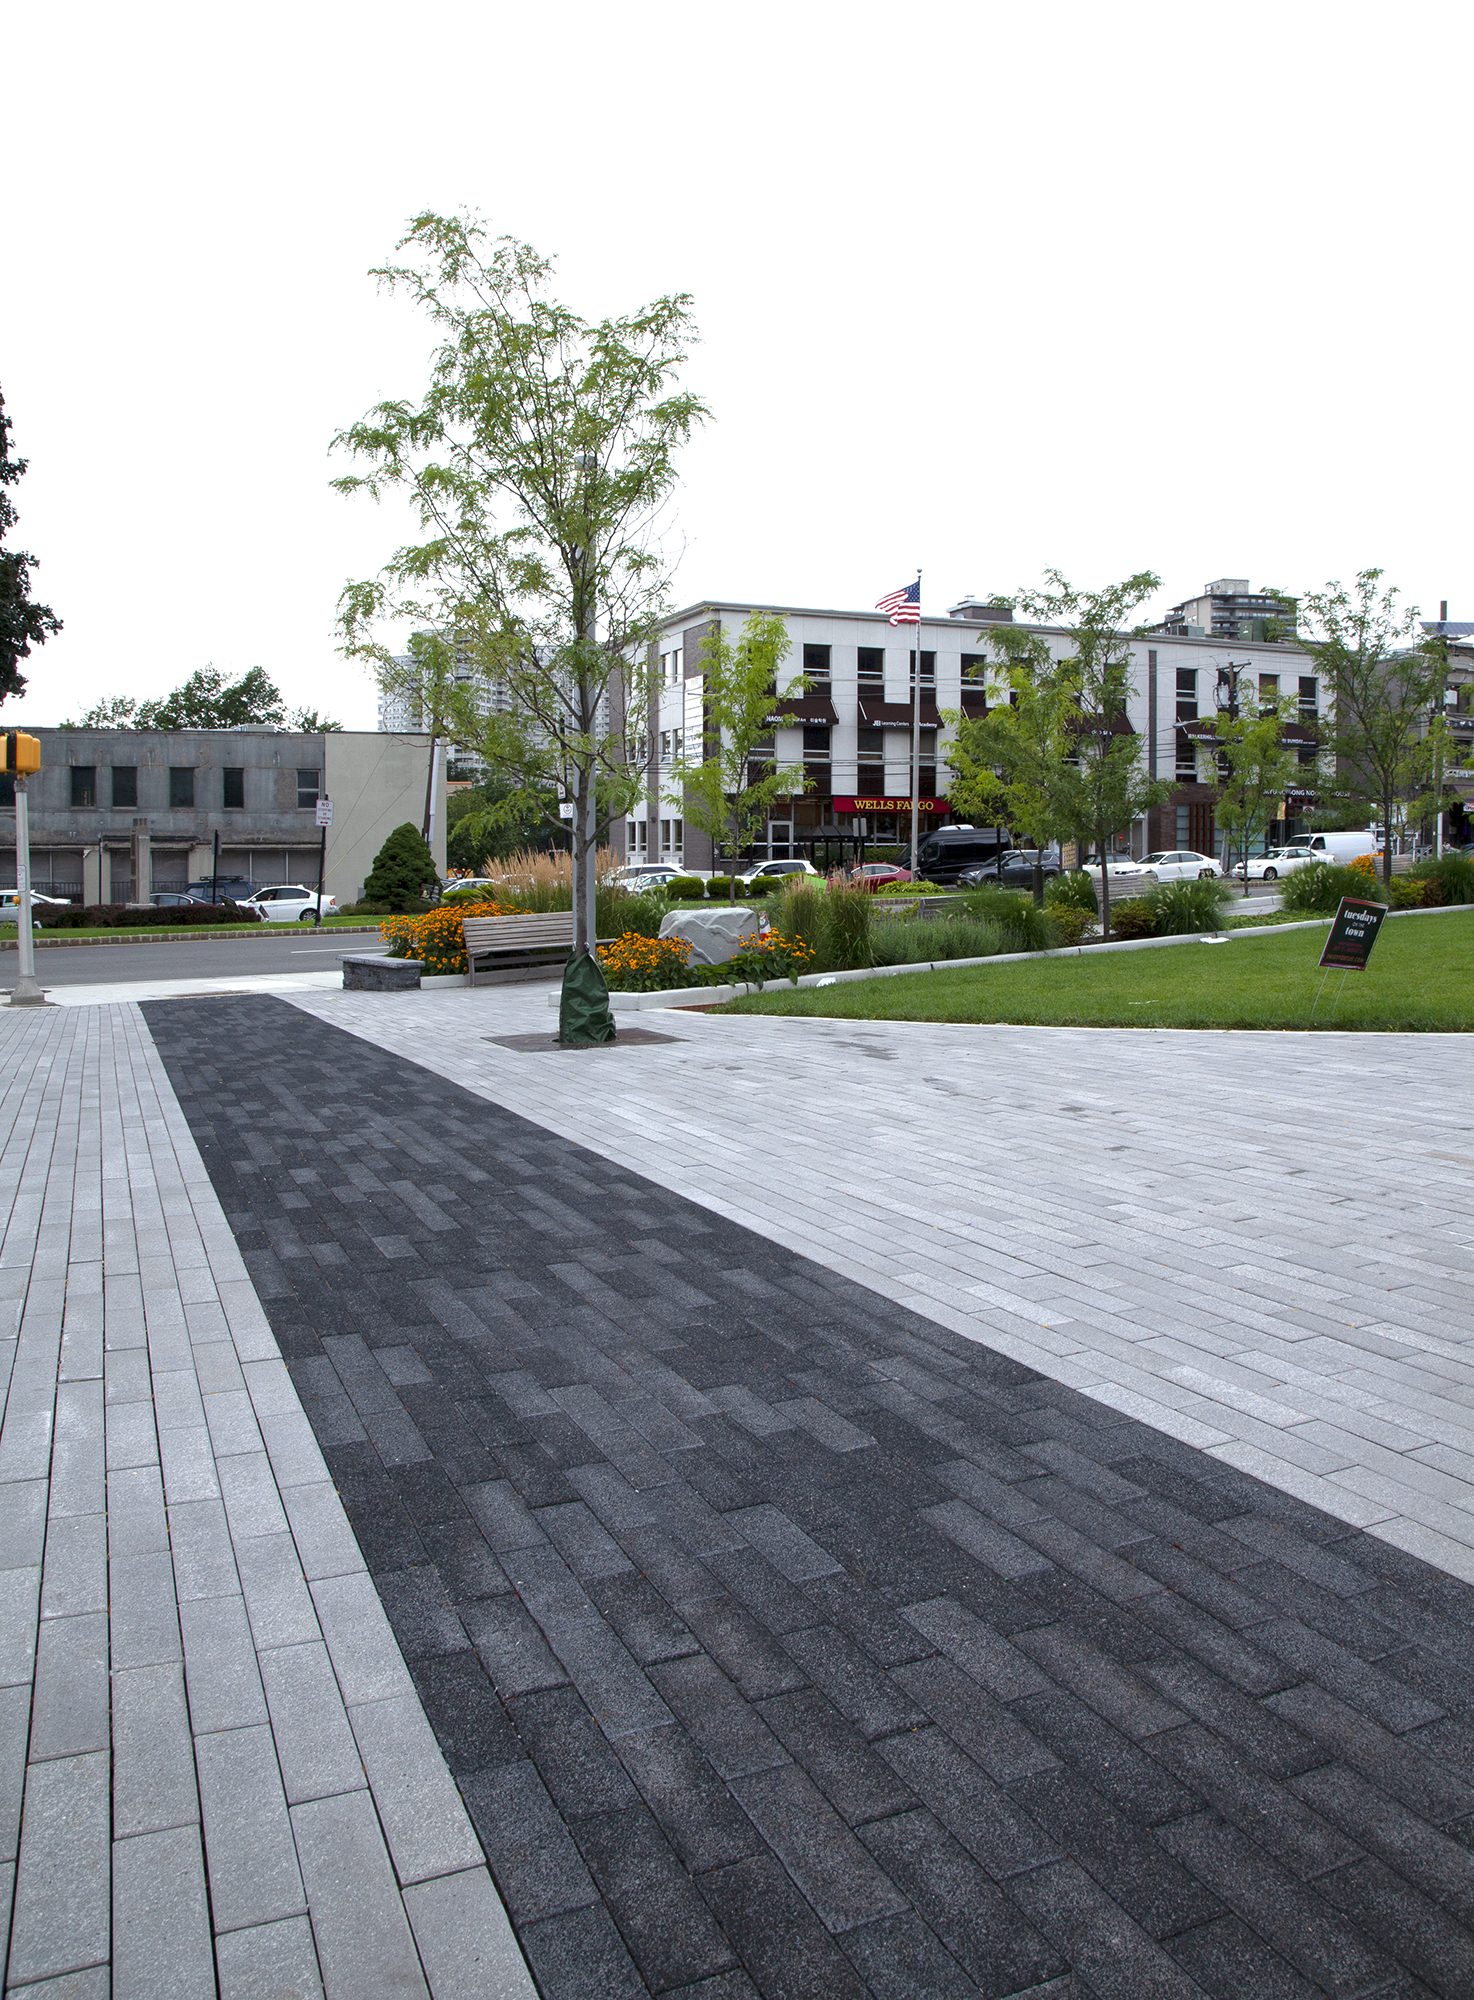 Moving in a running bond pattern, black Promenade Planks lead straight toward the roadway slicing through a sea of grey pavers.